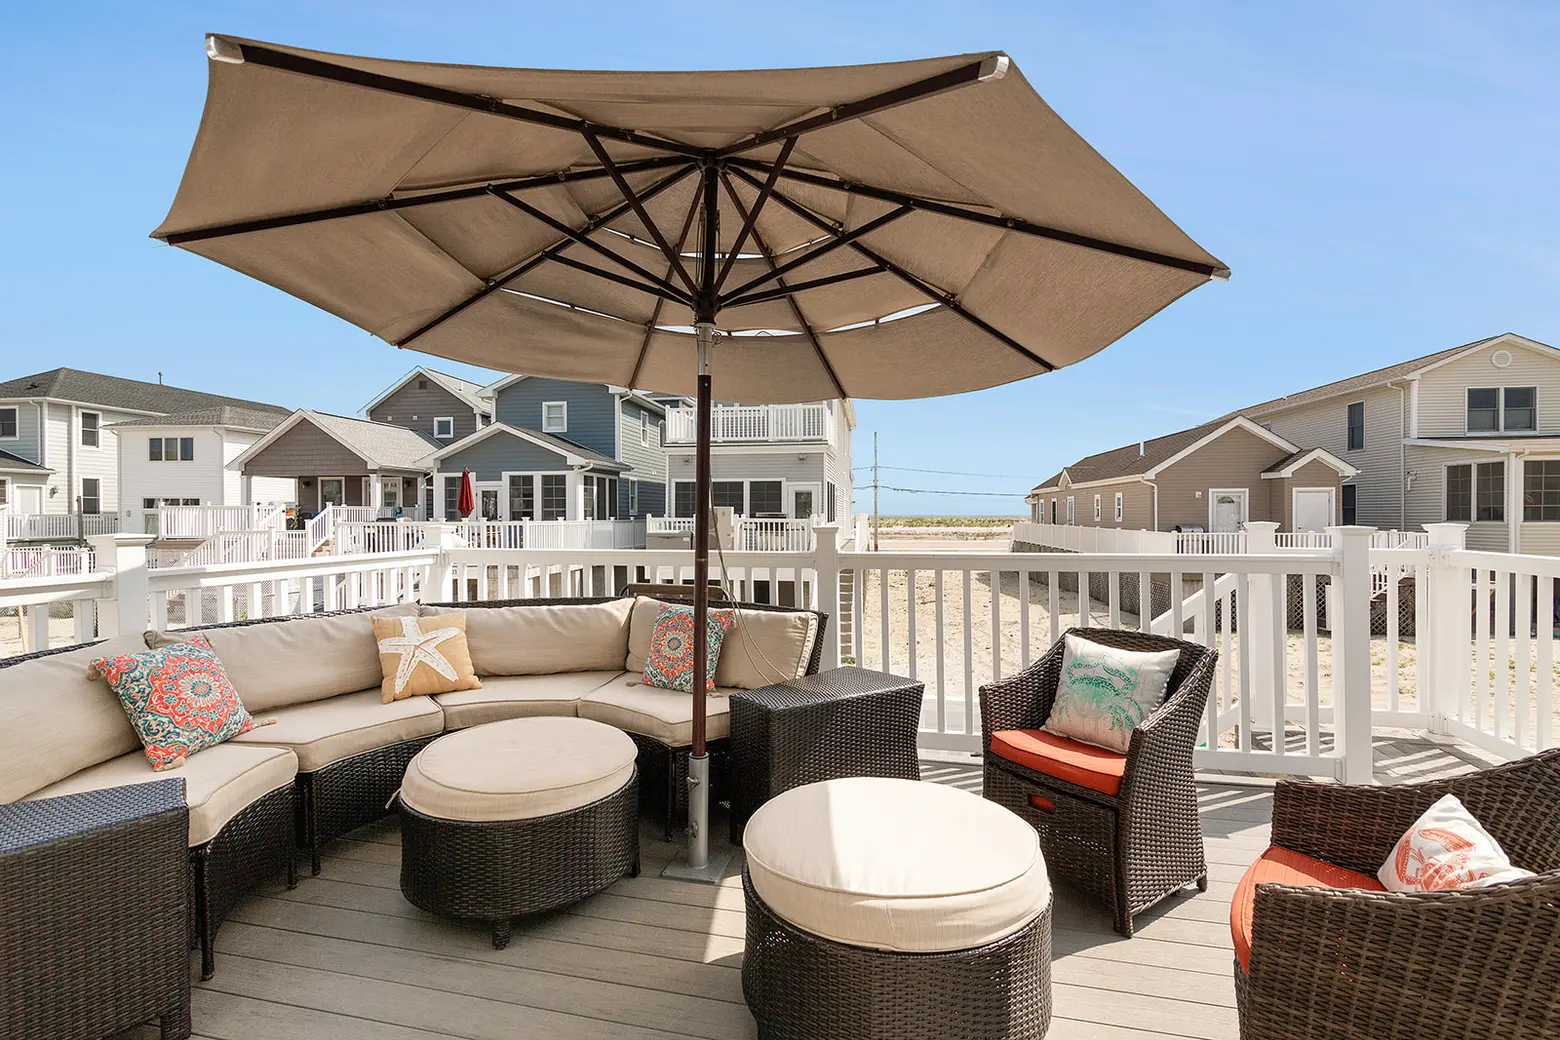 For $1.1M, you can own a newly built home on the Rockaway beach